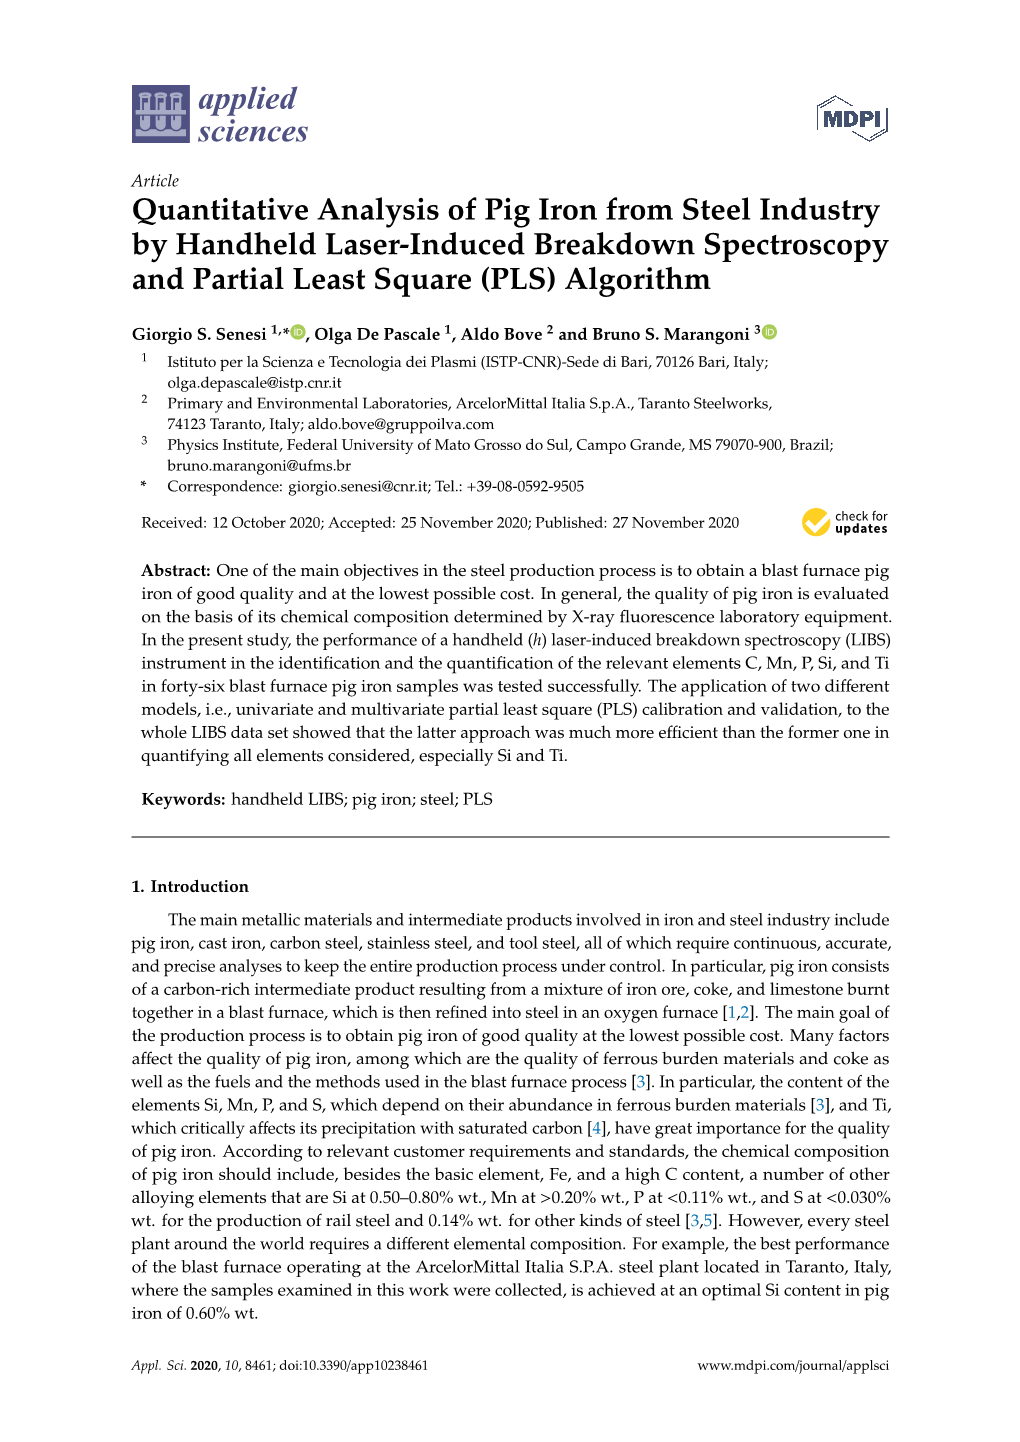 Quantitative Analysis of Pig Iron from Steel Industry by Handheld Laser-Induced Breakdown Spectroscopy and Partial Least Square (PLS) Algorithm